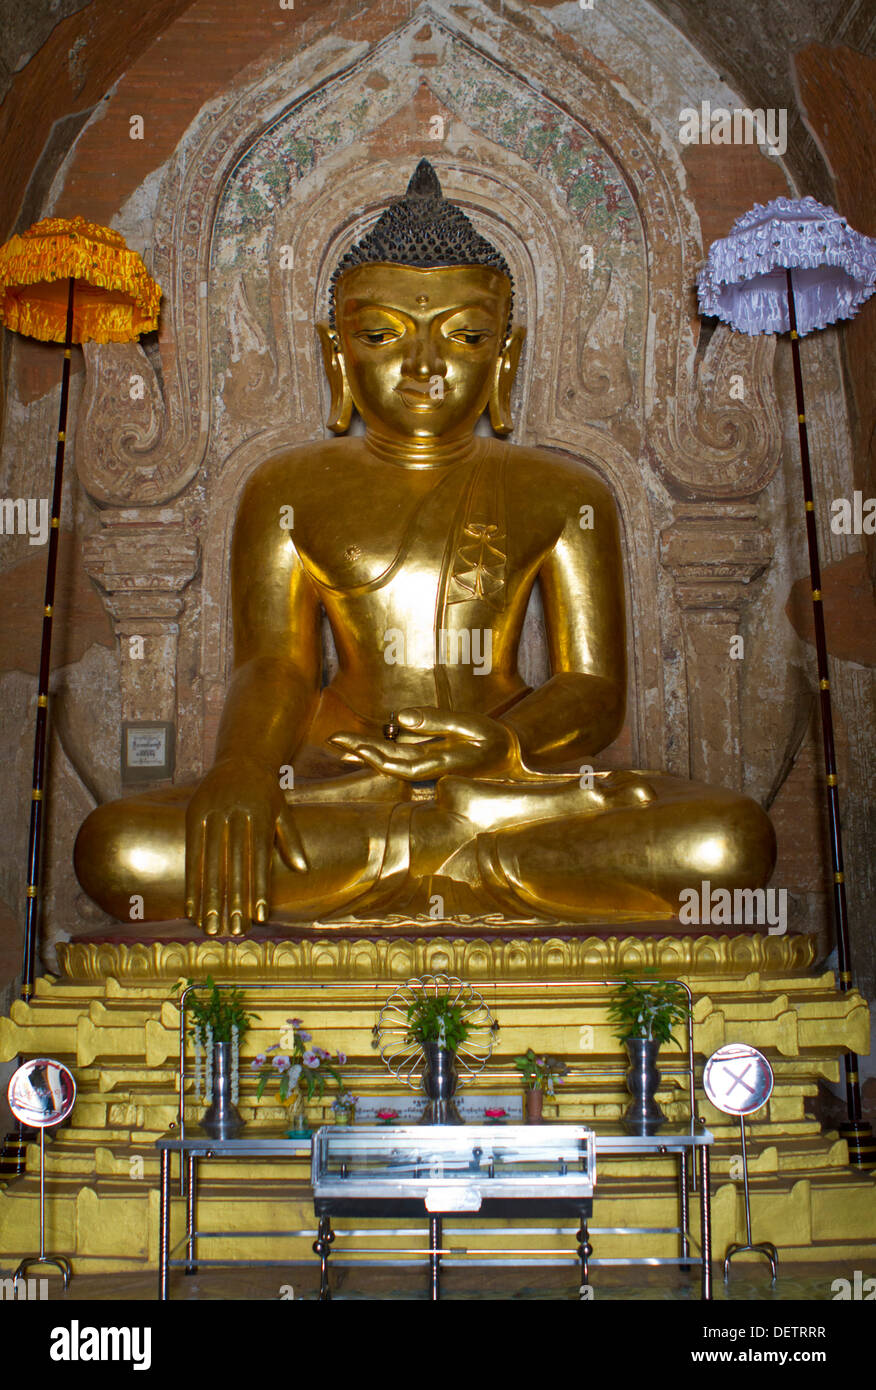 A buddha image in a temple in the North Plain of Bagan. Stock Photo